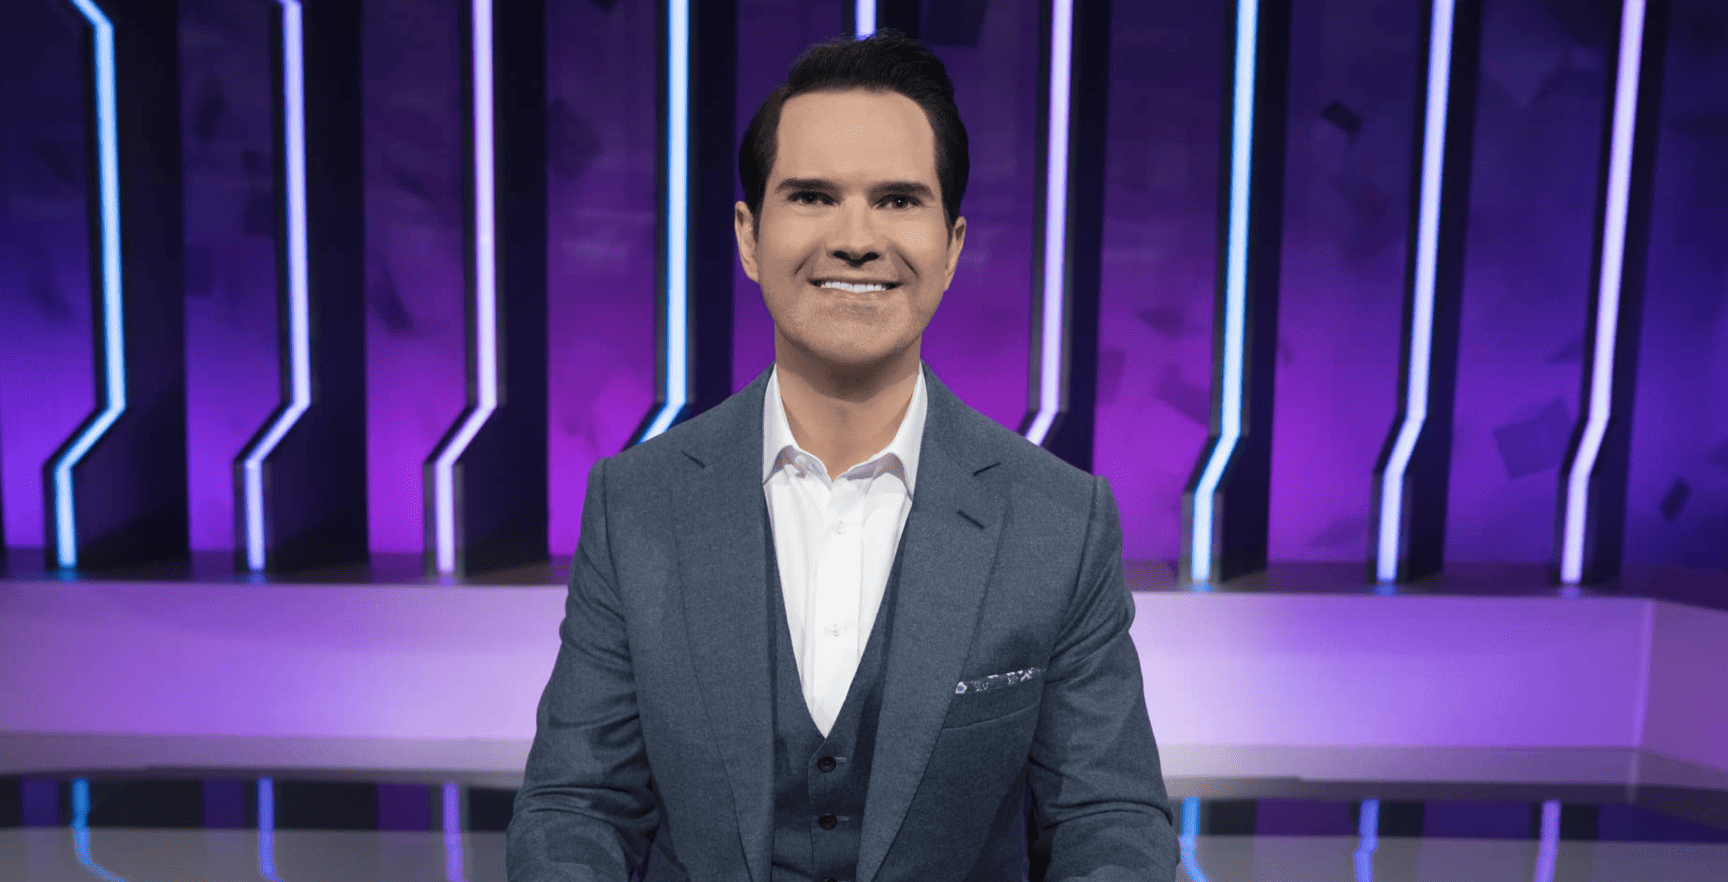 Jimmy Carr is staring directly at the camera in this image from Netflix